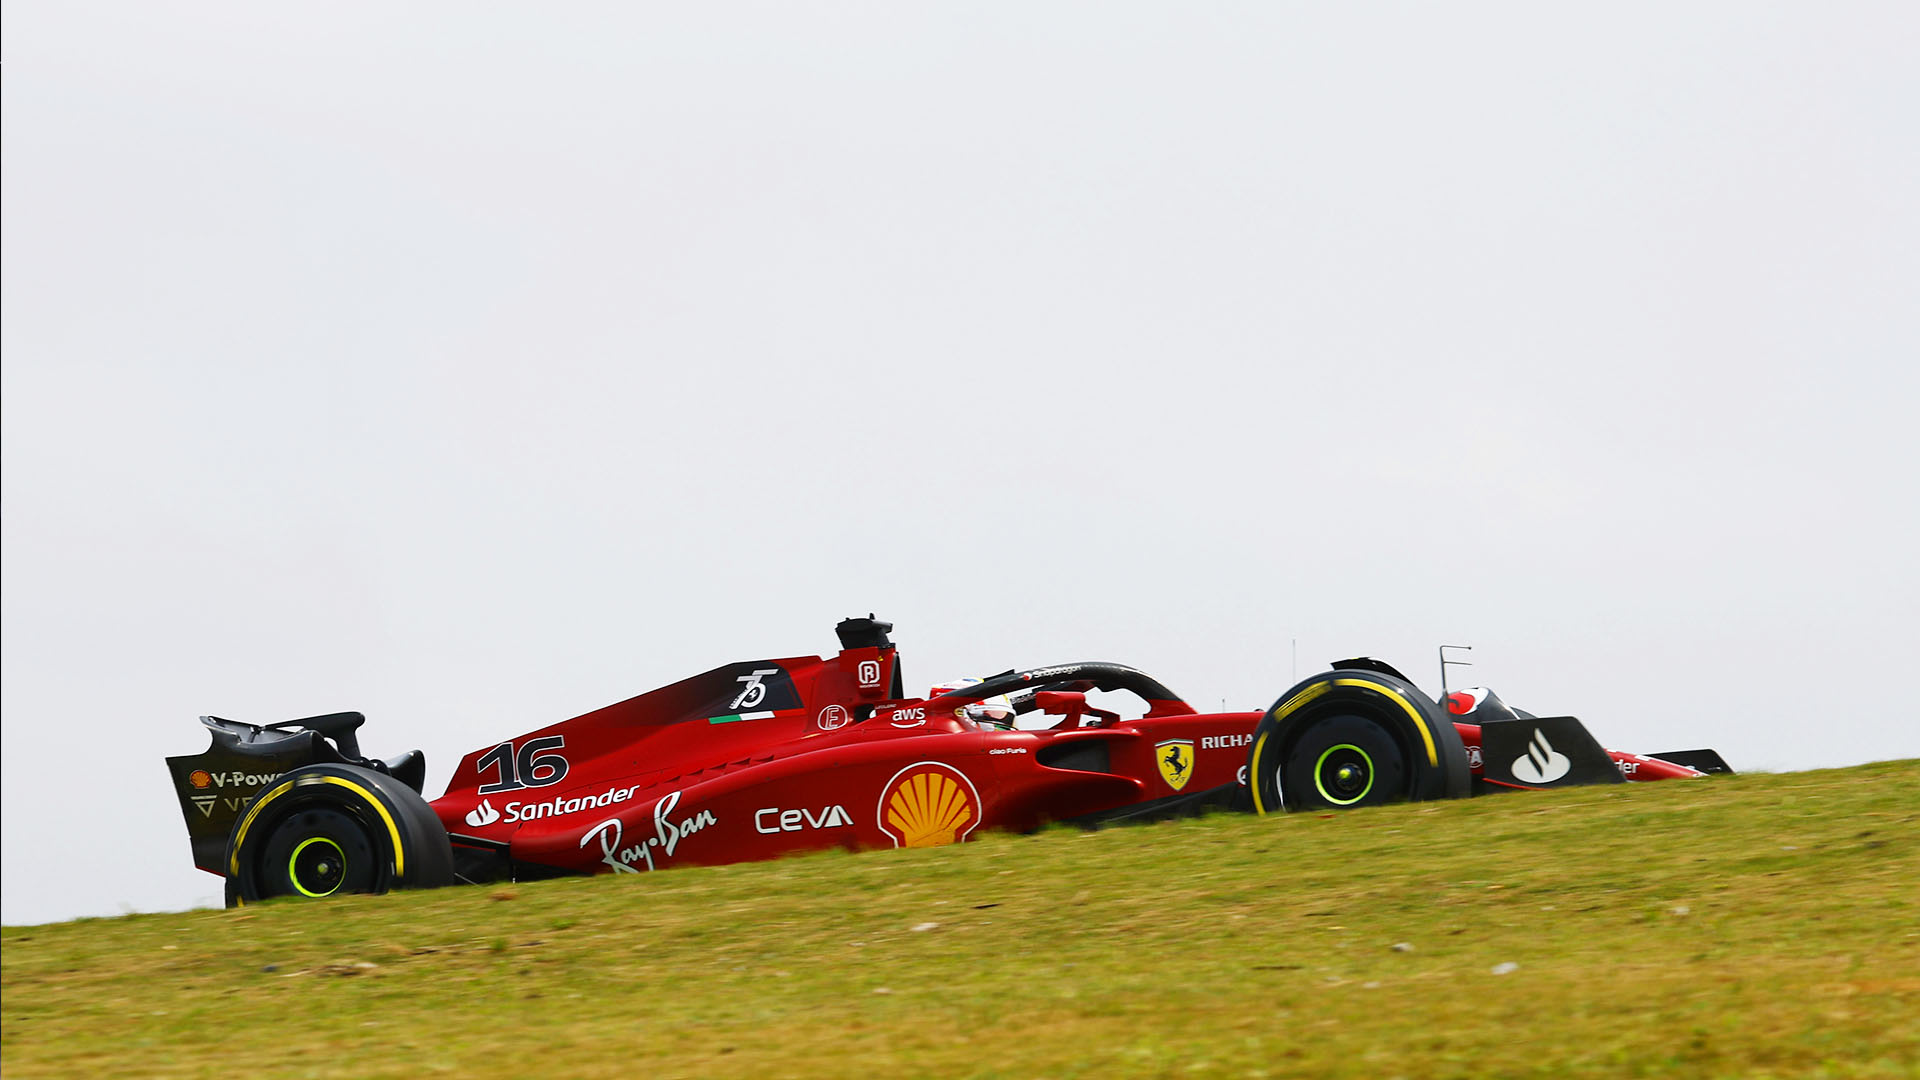 AS IT HAPPENED: Follow all the action from qualifying in Sao Paulo - Formula 1